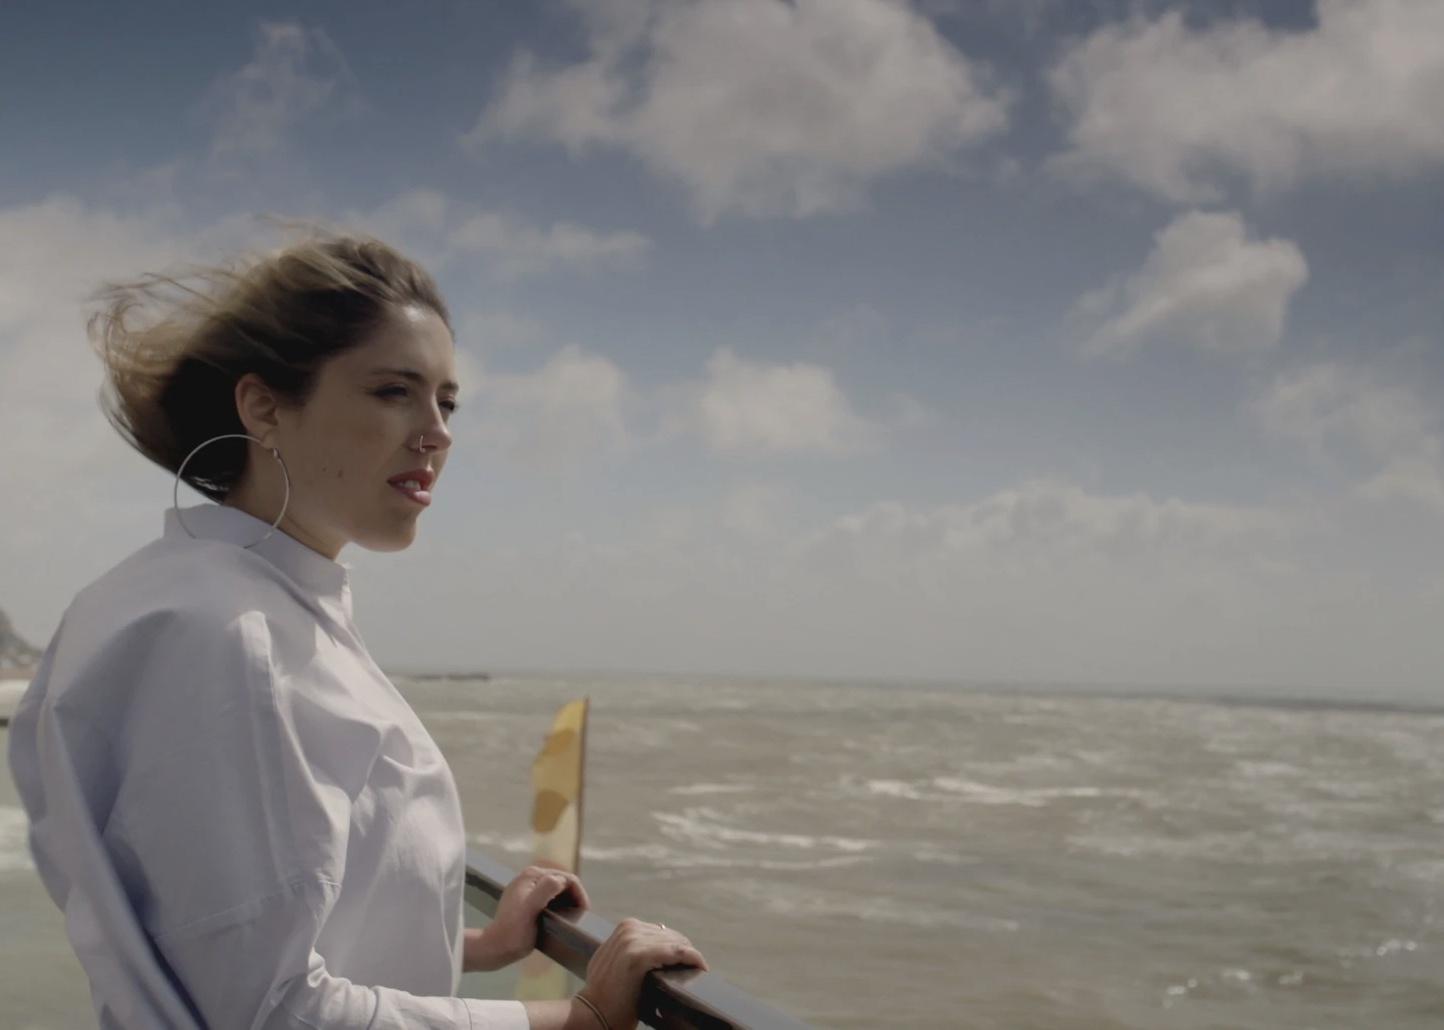 A woman in white with a nose ring and large hoop earrings stands next to a windy sea.